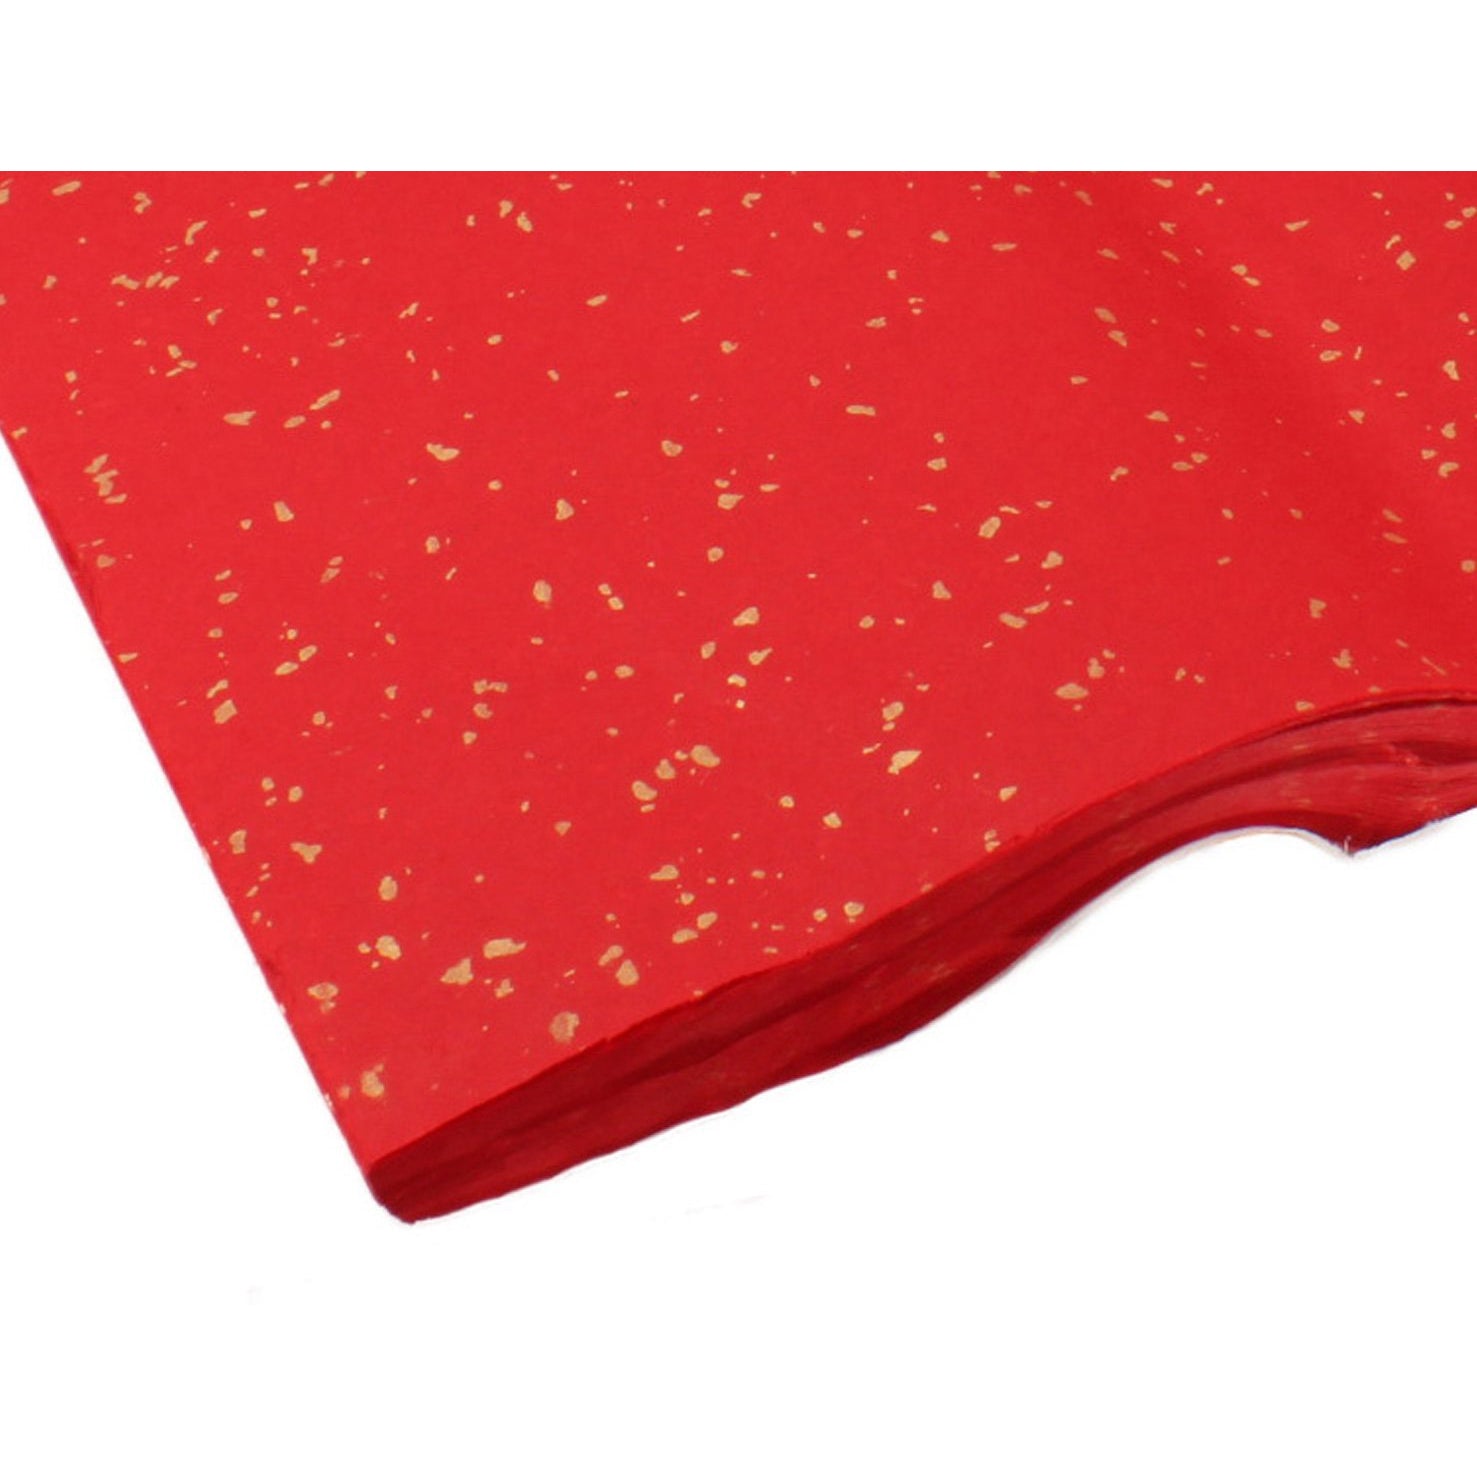 MR FIVE 100 Sheets Red with Gold Chinese FU Tissue Paper Bulk,20 x  14,Gold FU Design Chinese New Year Tissue Paper,Chinese New Year Gift  Wrapping